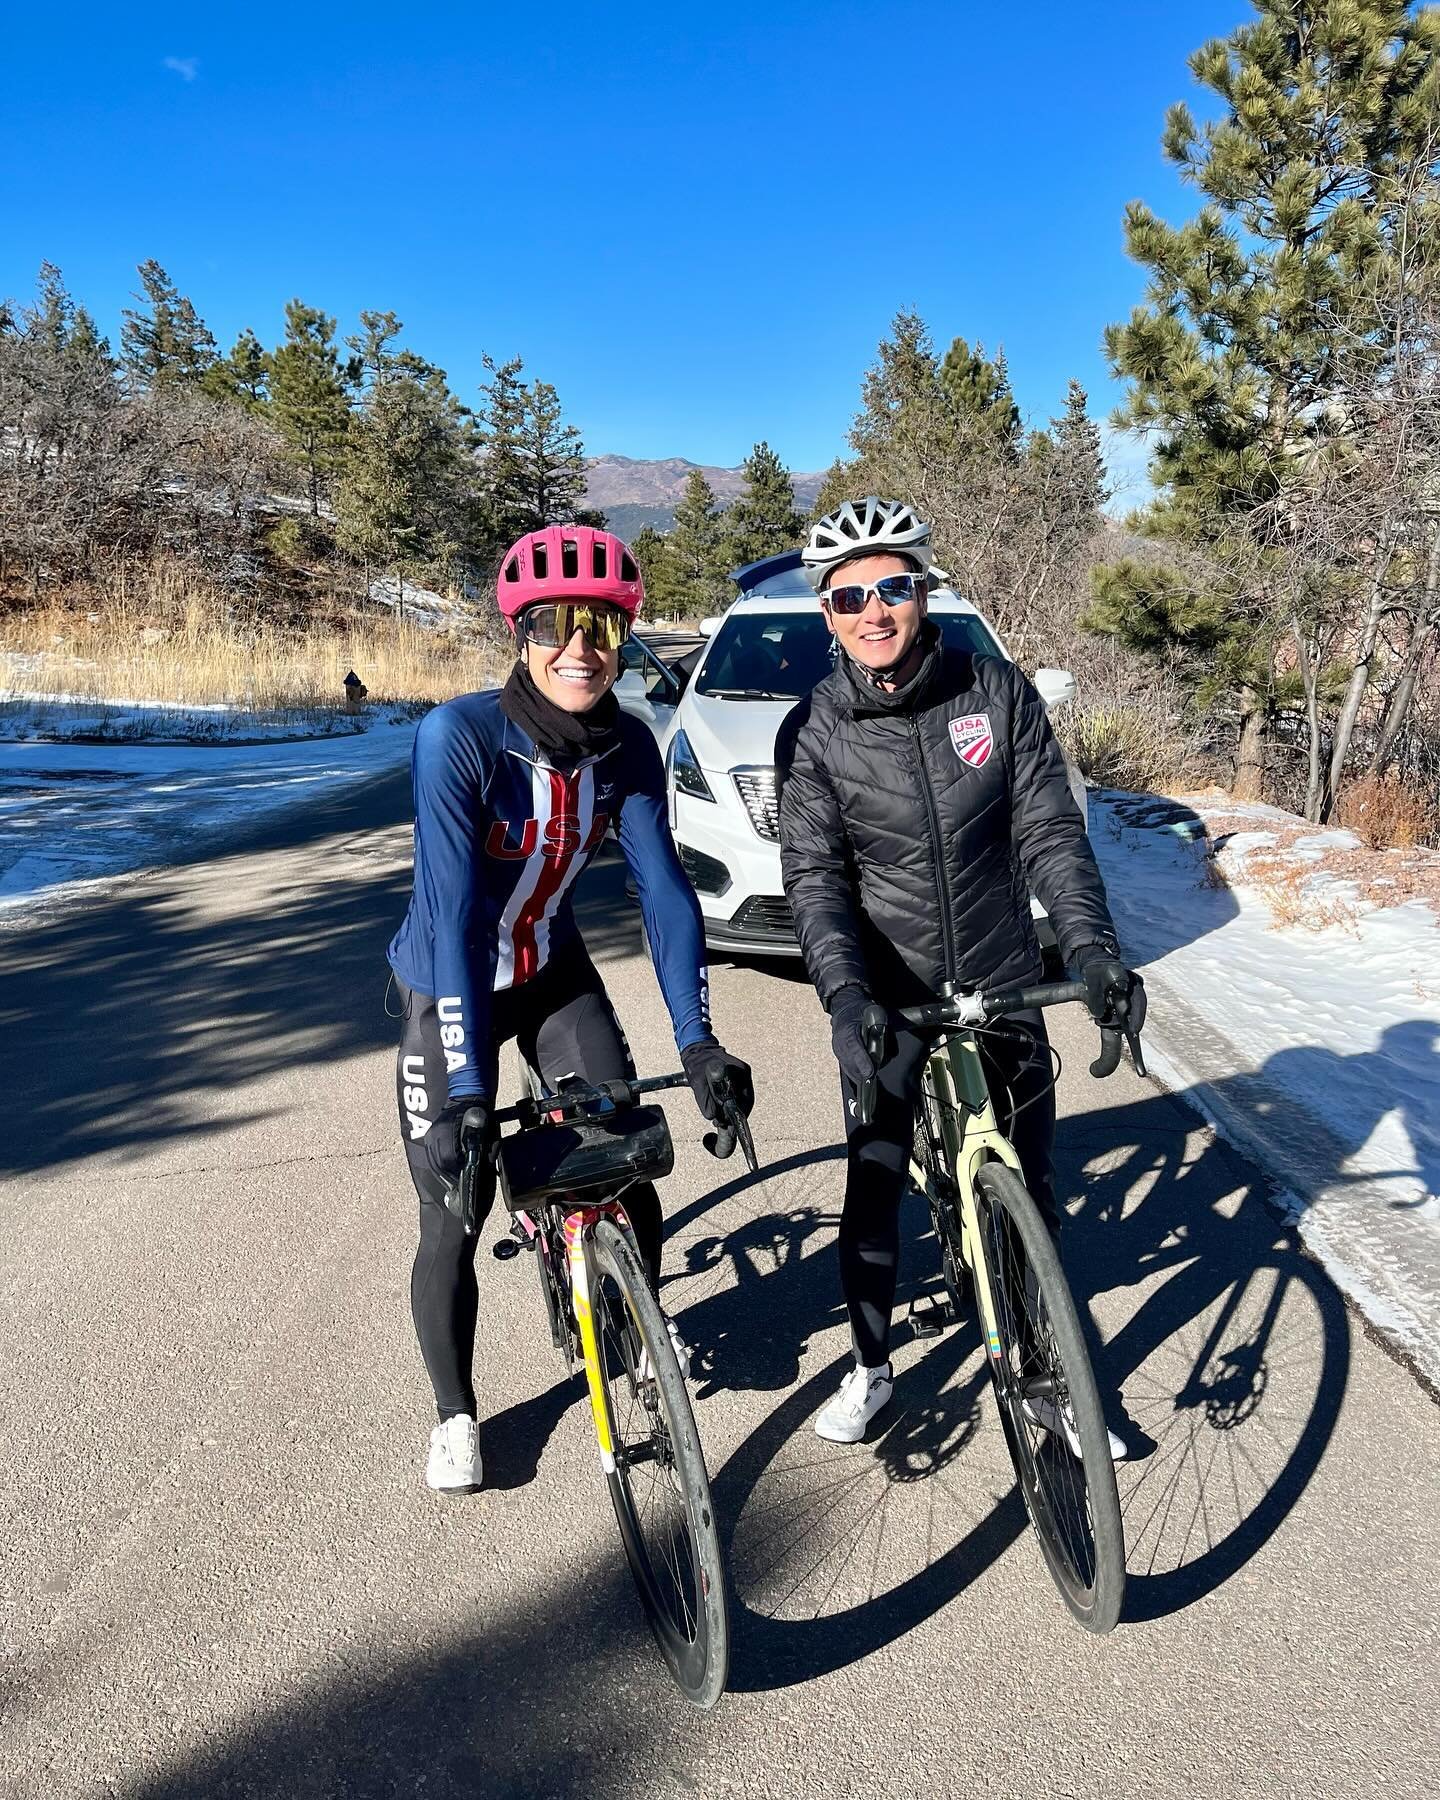 Today&rsquo;s highlight was riding with NBC&rsquo;s #1 Correspondant @stephanie.gosk. Thanks for your thoughtful questions and for putting up with Colorado&rsquo;s 30-degree weather! 🥶 

📸 @angelinapalermo 

#nbcinterview #stephaniegosk #cyclinggoa